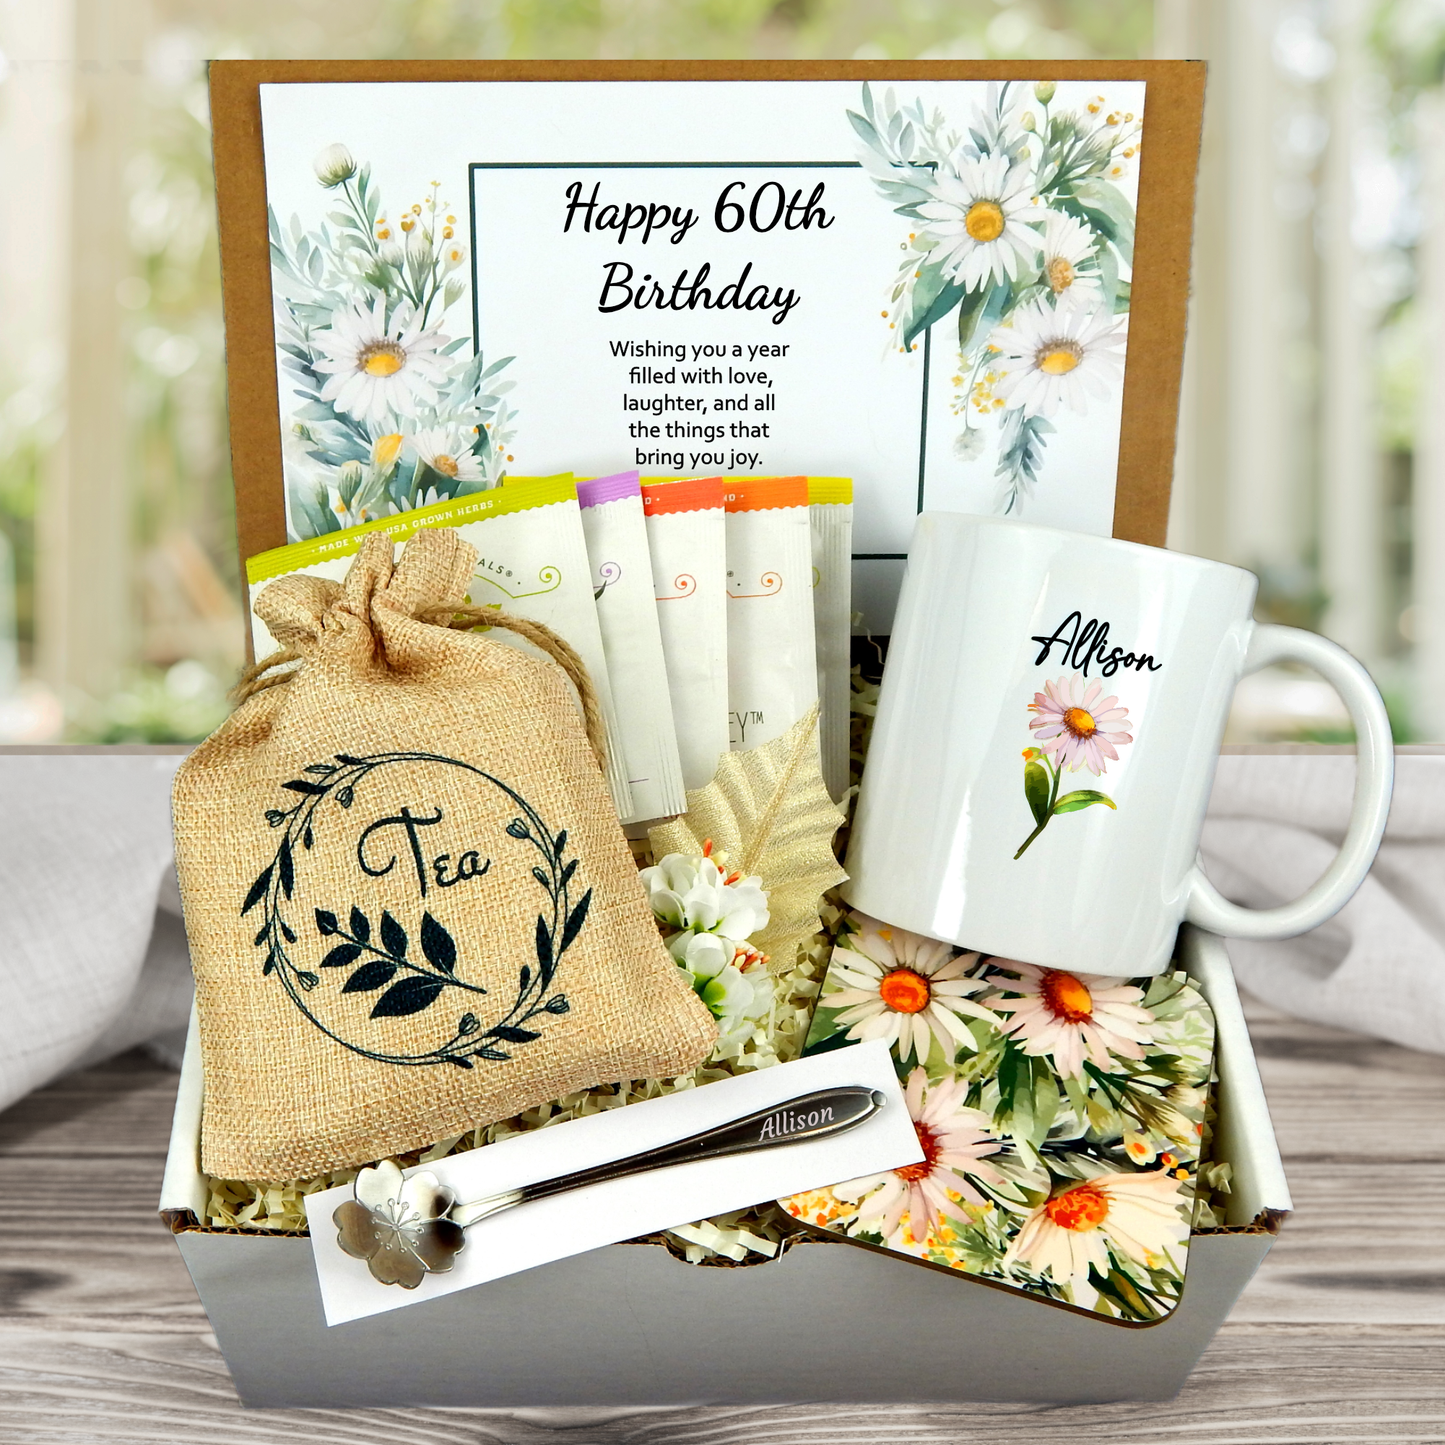 Daisy themed gift for her 60th birthday with personalized mug, meaningful card and assorted teas with engraved stir spoon